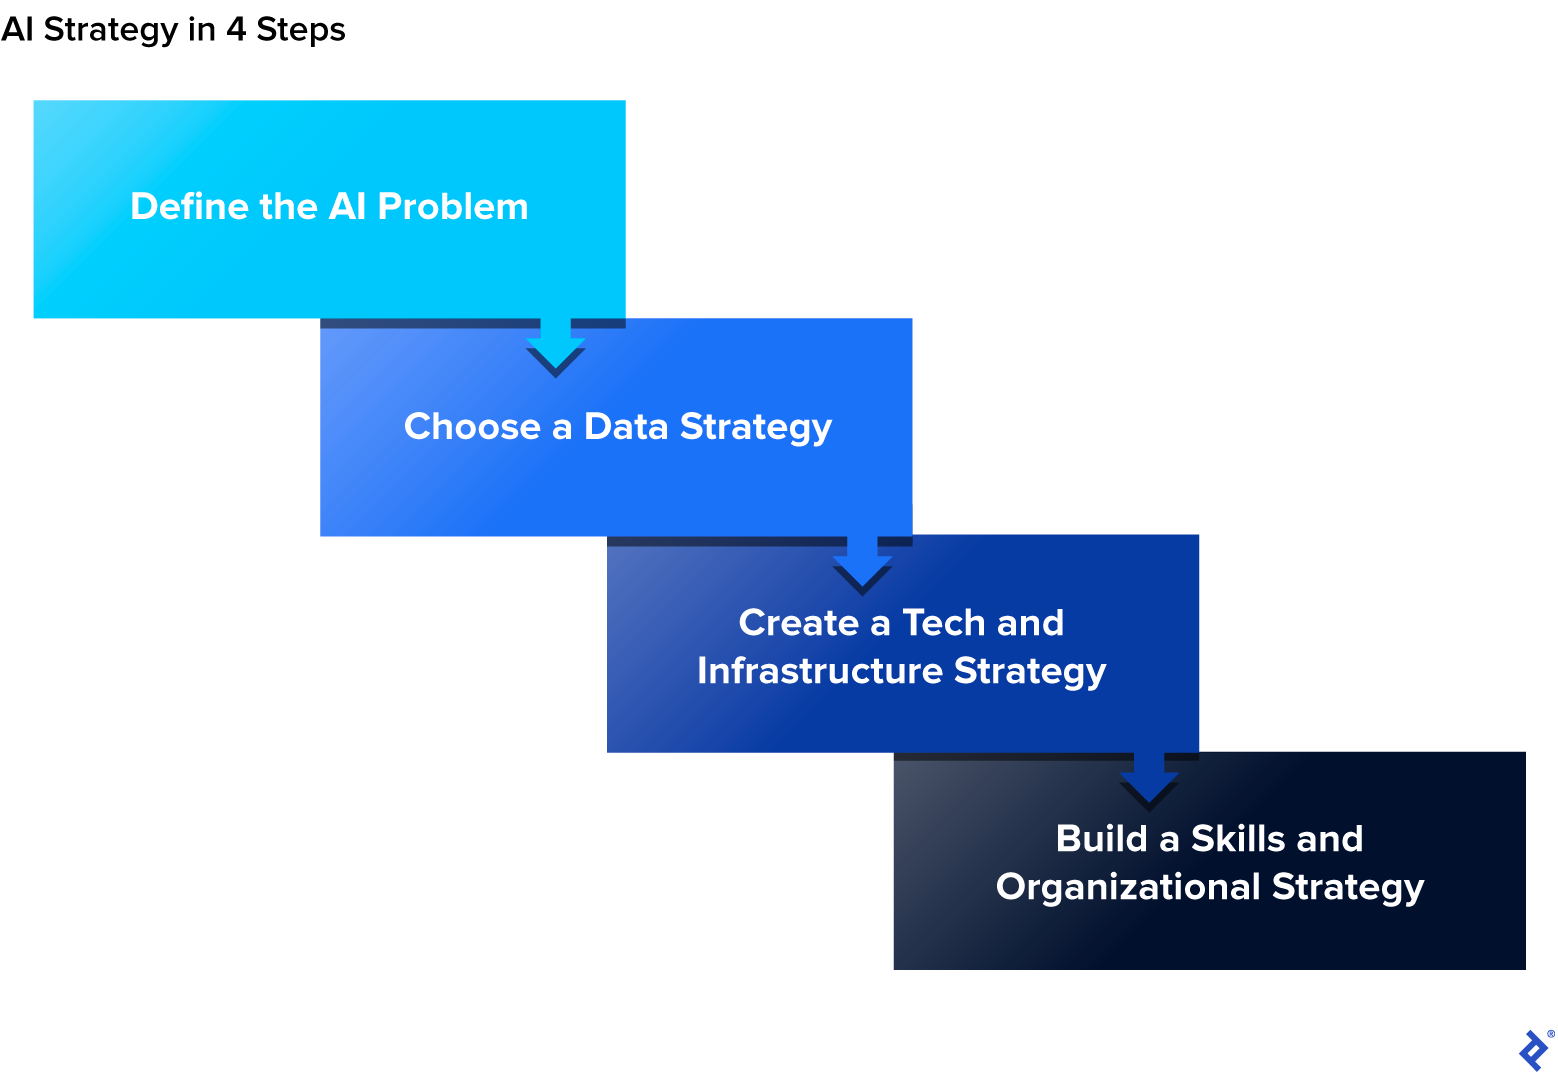 “AI Strategy in 4 Steps” begins with “Define the AI Problem” and ends with “Build a Skills and Organizational Strategy.”